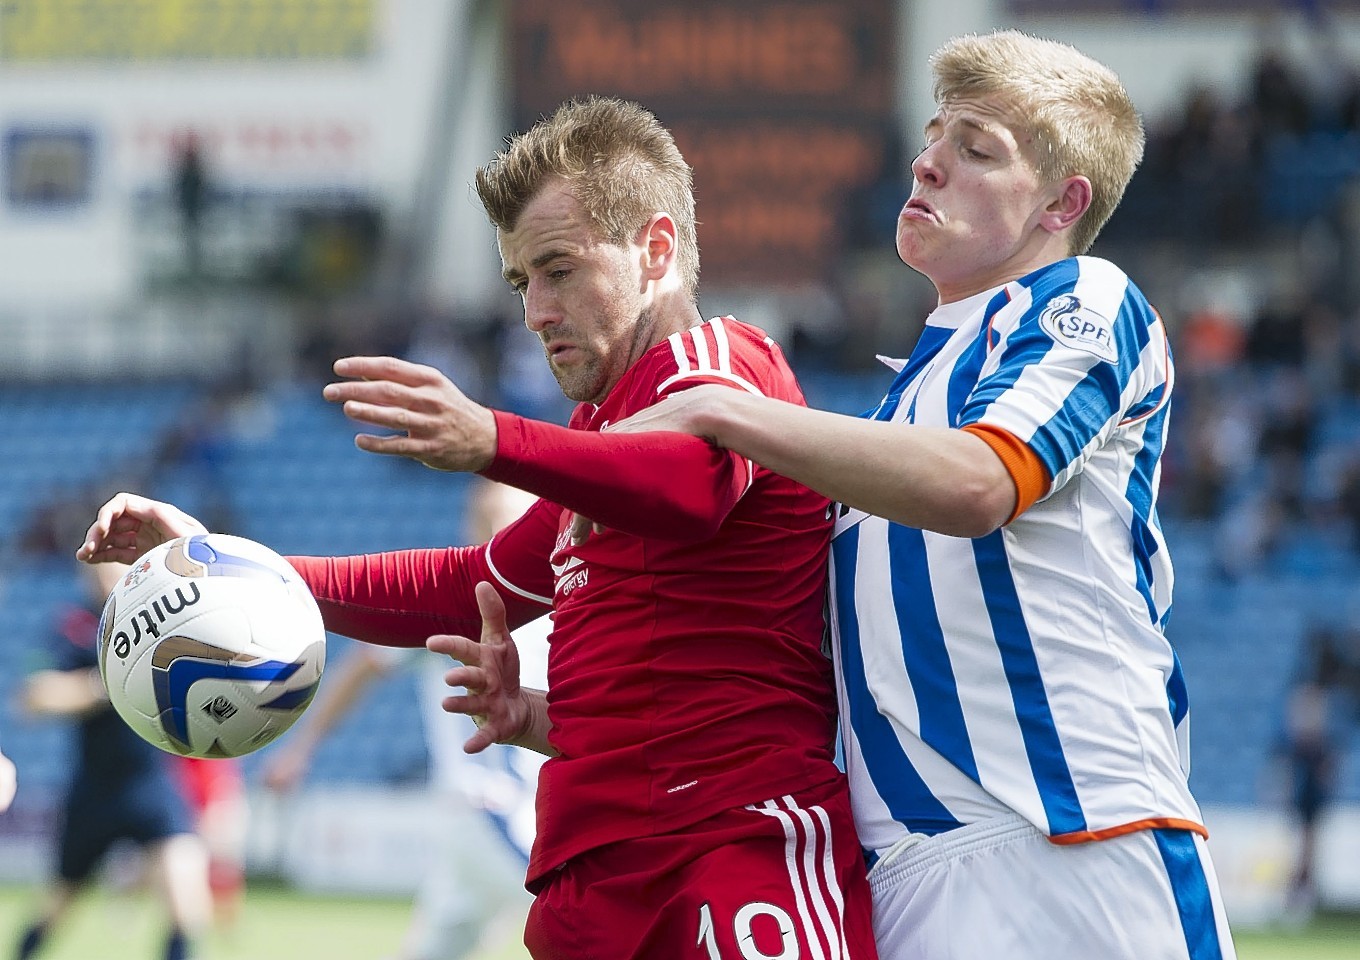 Niall McGinn fights for the ball against Kilmarnock in Aberdeen's 2-1 win